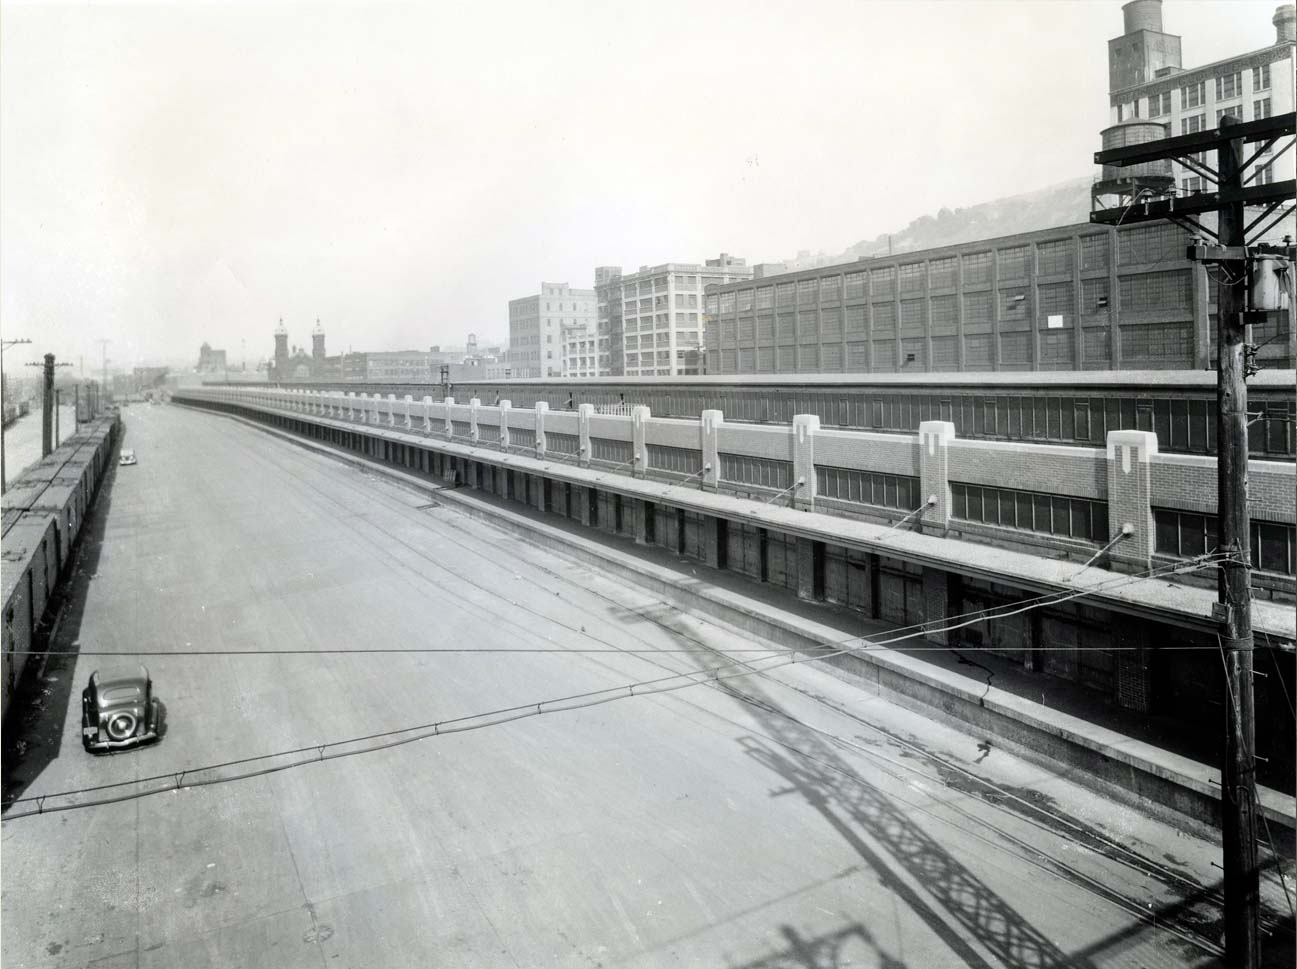 16th St. Produce Terminal of the Pennsylvania Railroad Fruit Auction & Sales Building. Taken in 1936. Courtesy of the Detre Library & Archives at the Heinz History Center.